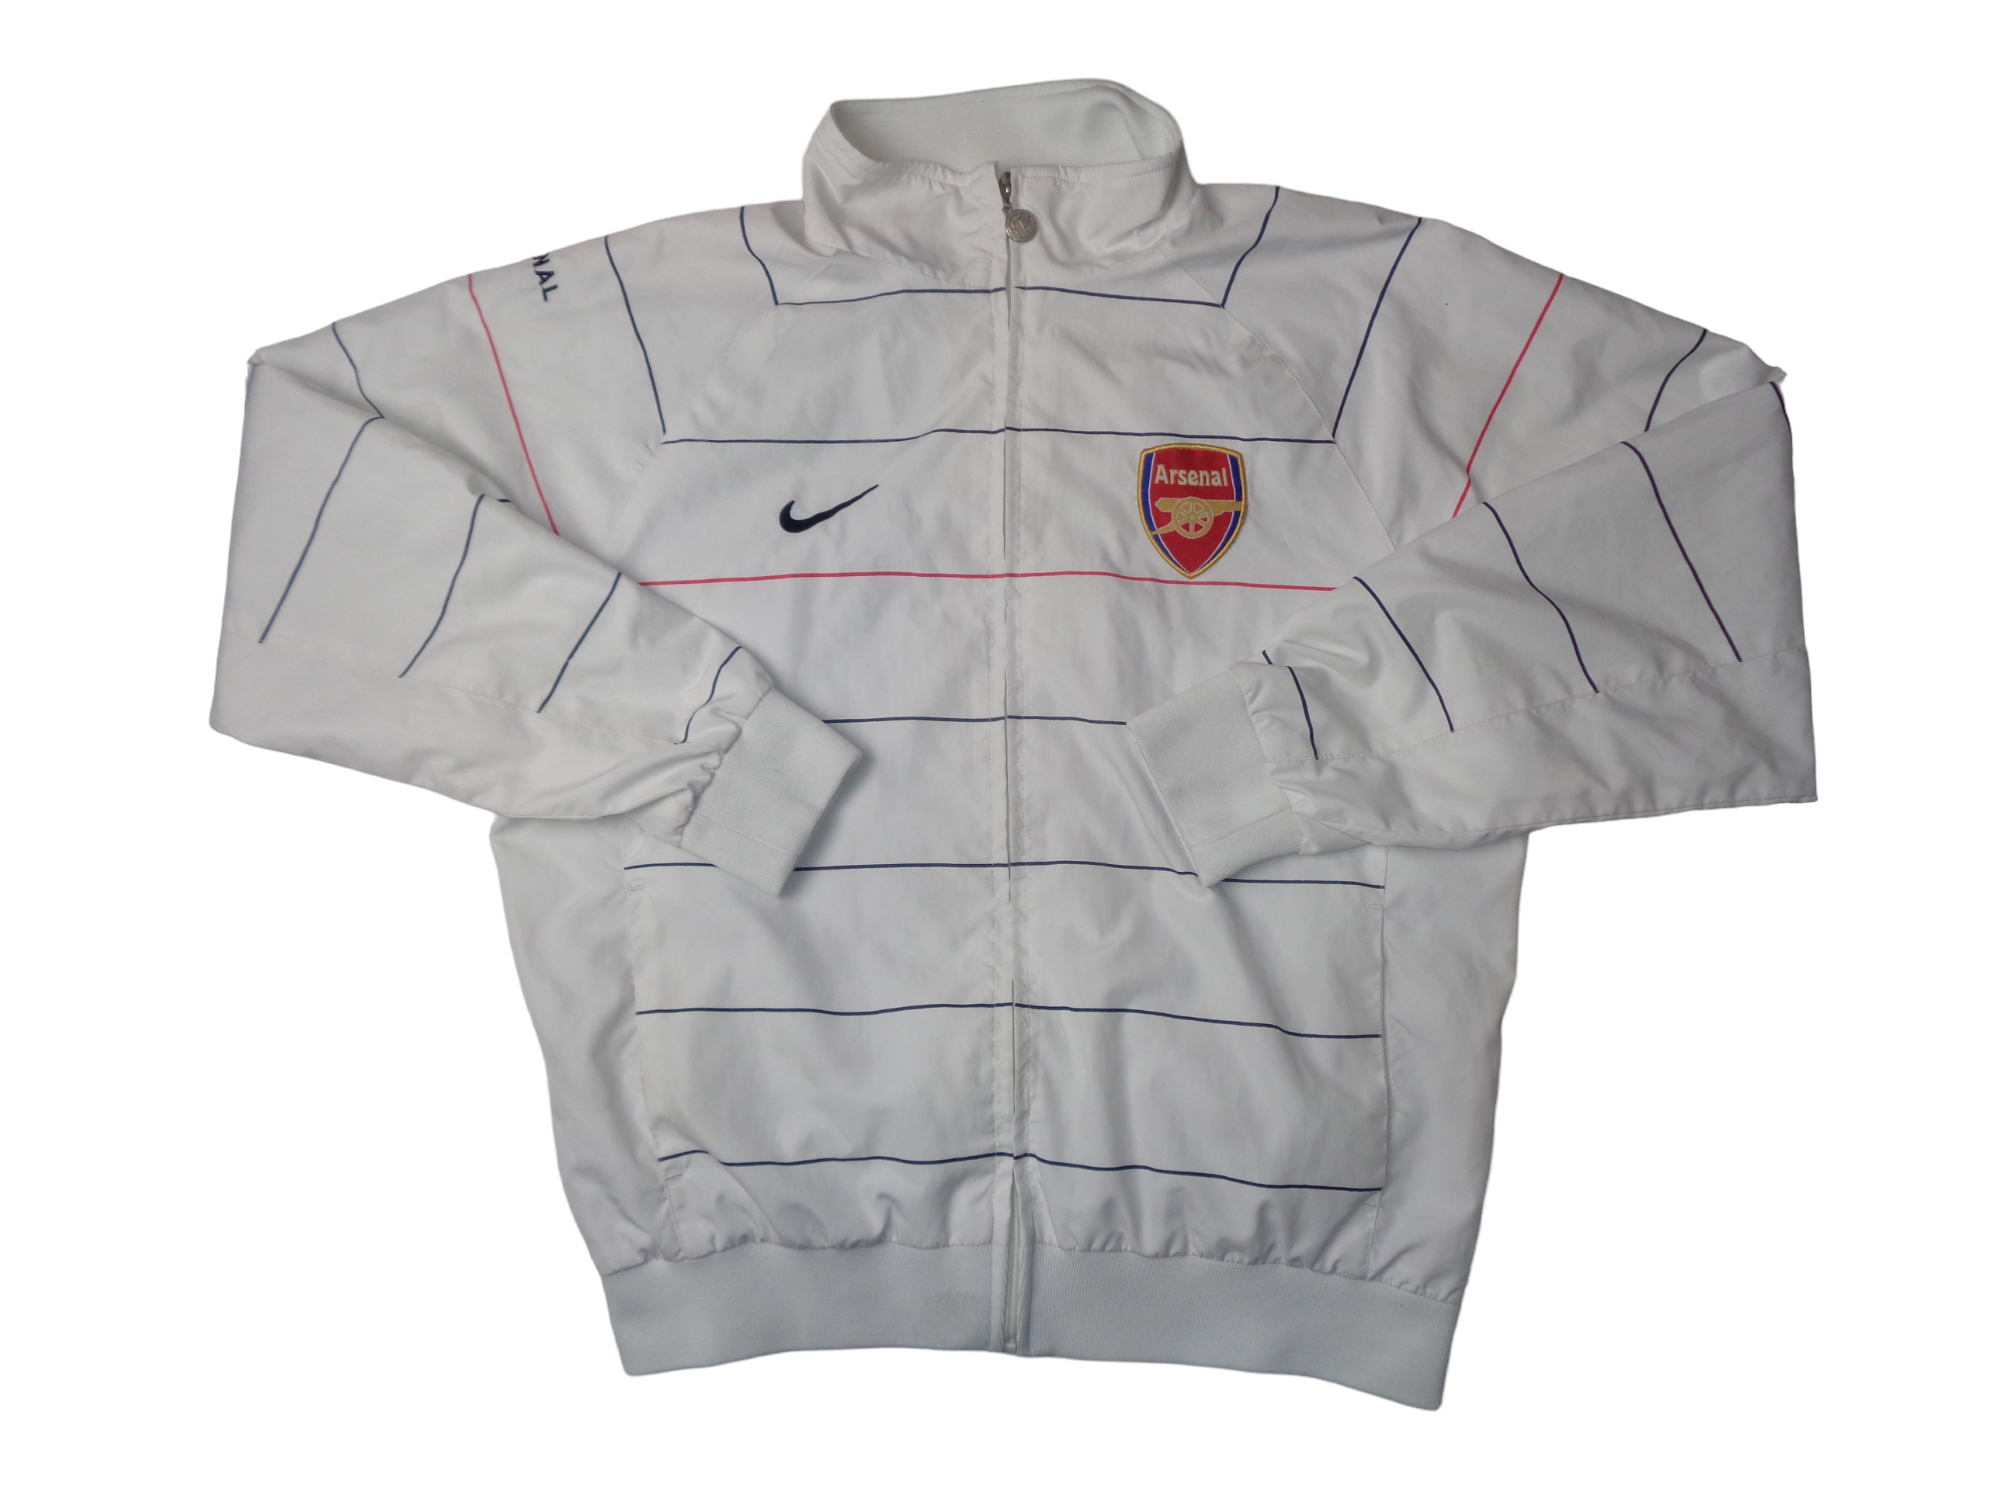 ARSENAL 2008/09 NIKE ZIP UP WOVEN WARM UP TRACK JACKET - SIZE SMALL